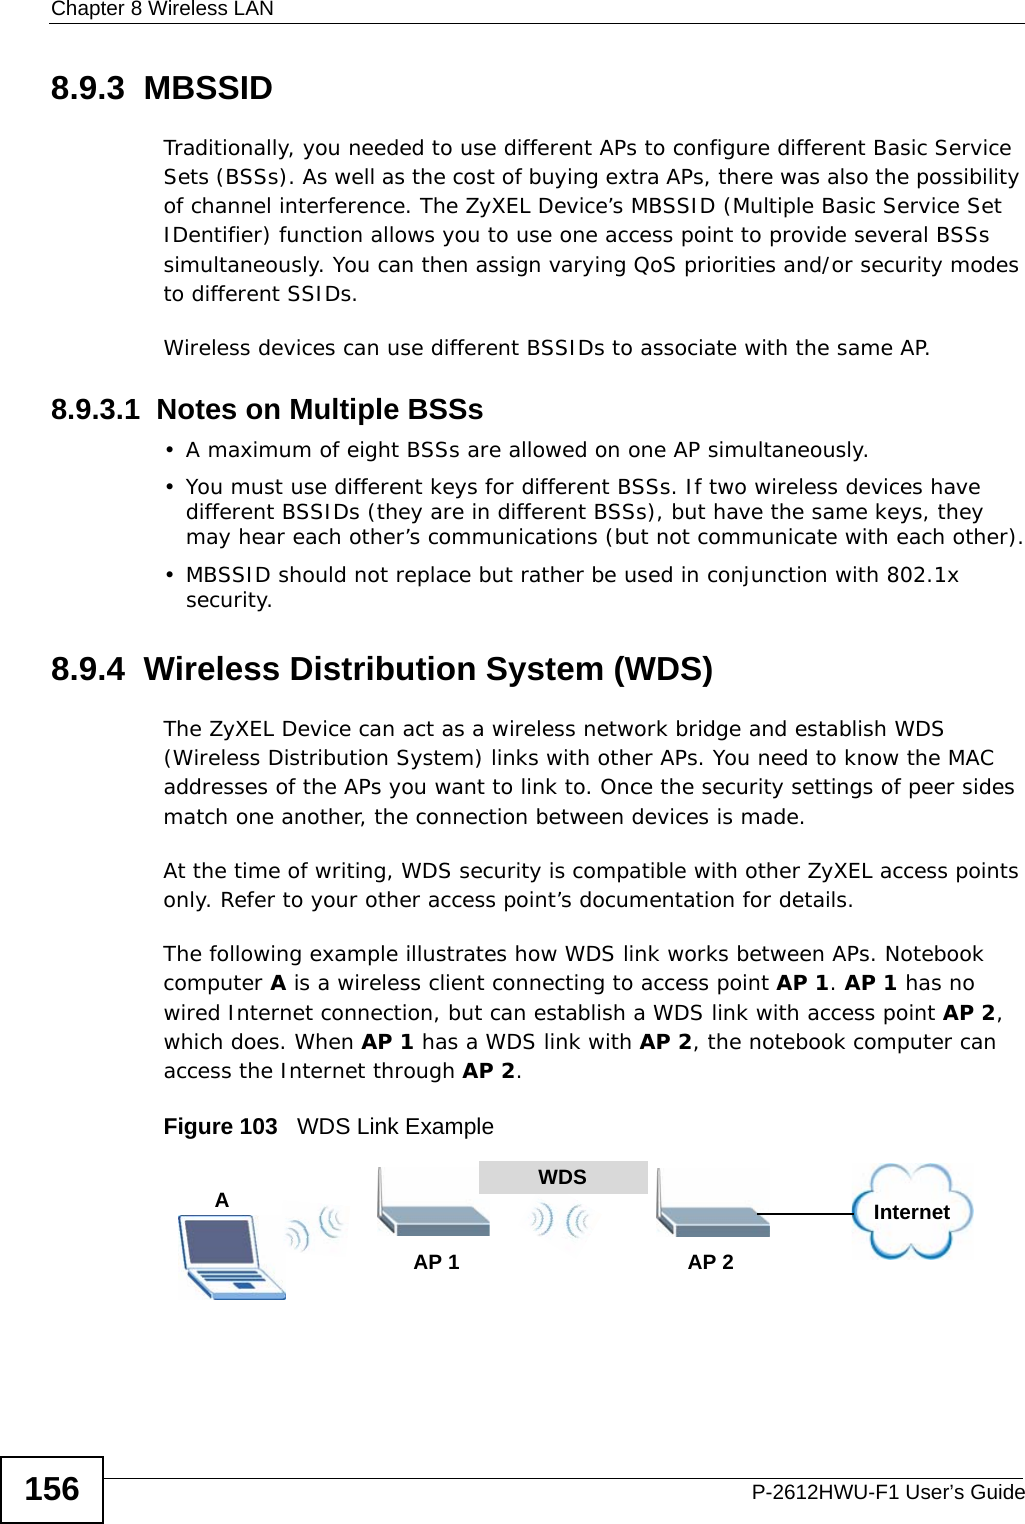 Chapter 8 Wireless LANP-2612HWU-F1 User’s Guide1568.9.3  MBSSIDTraditionally, you needed to use different APs to configure different Basic Service Sets (BSSs). As well as the cost of buying extra APs, there was also the possibility of channel interference. The ZyXEL Device’s MBSSID (Multiple Basic Service Set IDentifier) function allows you to use one access point to provide several BSSs simultaneously. You can then assign varying QoS priorities and/or security modes to different SSIDs.Wireless devices can use different BSSIDs to associate with the same AP.8.9.3.1  Notes on Multiple BSSs• A maximum of eight BSSs are allowed on one AP simultaneously.• You must use different keys for different BSSs. If two wireless devices have different BSSIDs (they are in different BSSs), but have the same keys, they may hear each other’s communications (but not communicate with each other).• MBSSID should not replace but rather be used in conjunction with 802.1x security.8.9.4  Wireless Distribution System (WDS)The ZyXEL Device can act as a wireless network bridge and establish WDS (Wireless Distribution System) links with other APs. You need to know the MAC addresses of the APs you want to link to. Once the security settings of peer sides match one another, the connection between devices is made.At the time of writing, WDS security is compatible with other ZyXEL access points only. Refer to your other access point’s documentation for details.The following example illustrates how WDS link works between APs. Notebook computer A is a wireless client connecting to access point AP 1. AP 1 has no wired Internet connection, but can establish a WDS link with access point AP 2, which does. When AP 1 has a WDS link with AP 2, the notebook computer can access the Internet through AP 2.Figure 103   WDS Link ExampleWDSAP 2AP 1InternetA